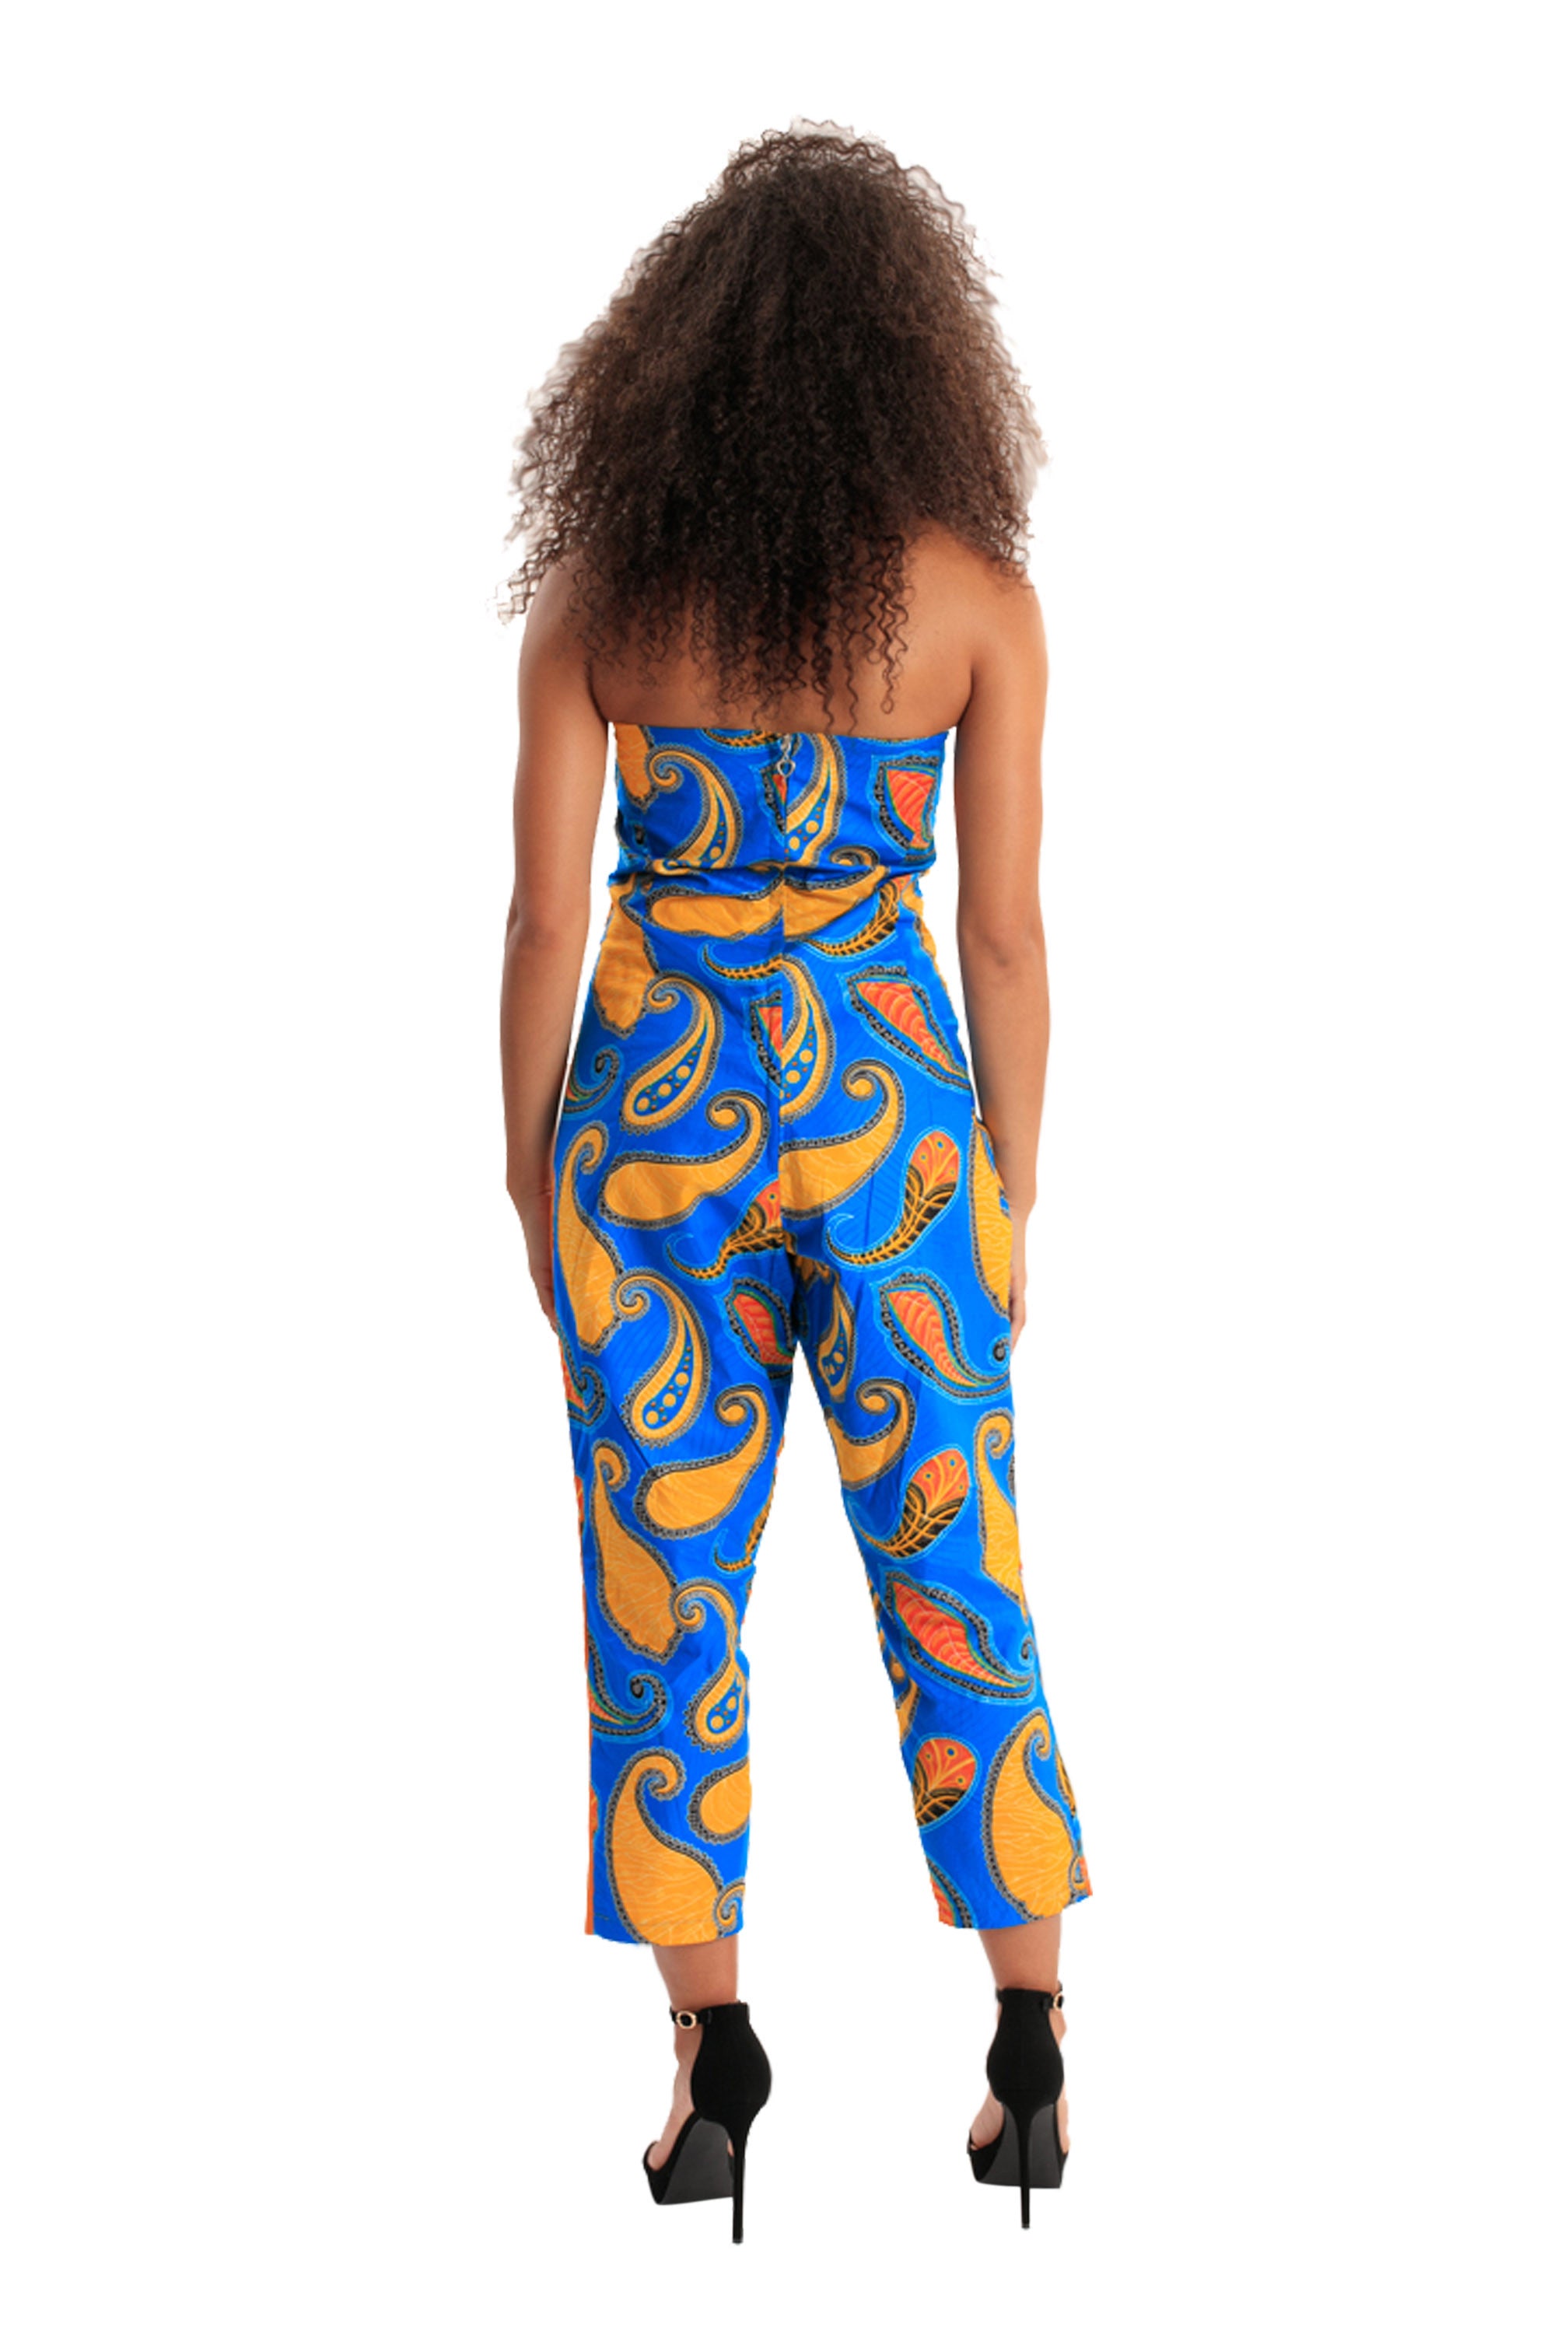 African Print Women Jumpsuit O-Neck Sleeveless Autumn Sexy Romper Wide Leg  Pants African Ladies Jumpsuits Rompers WY2244 | Wish